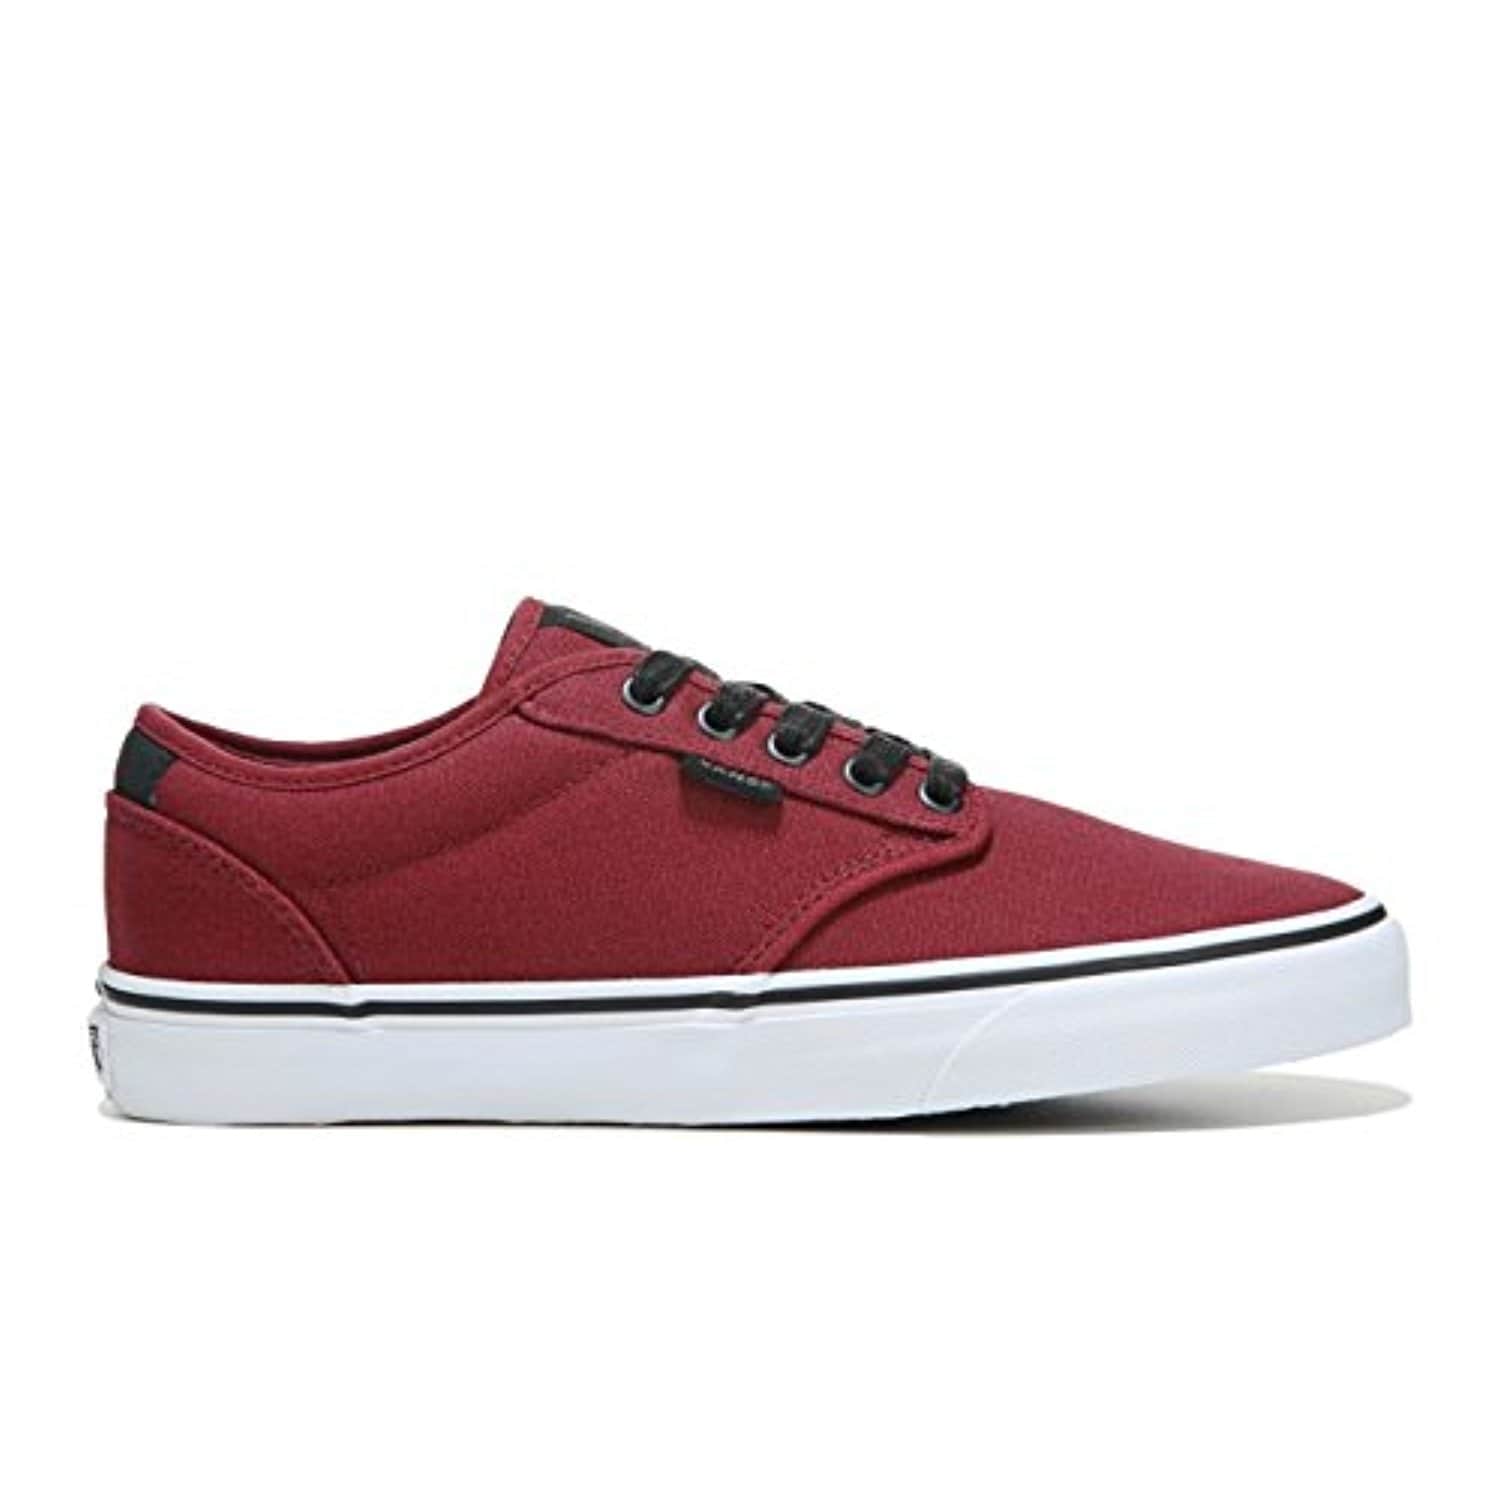 vans atwood deluxe red